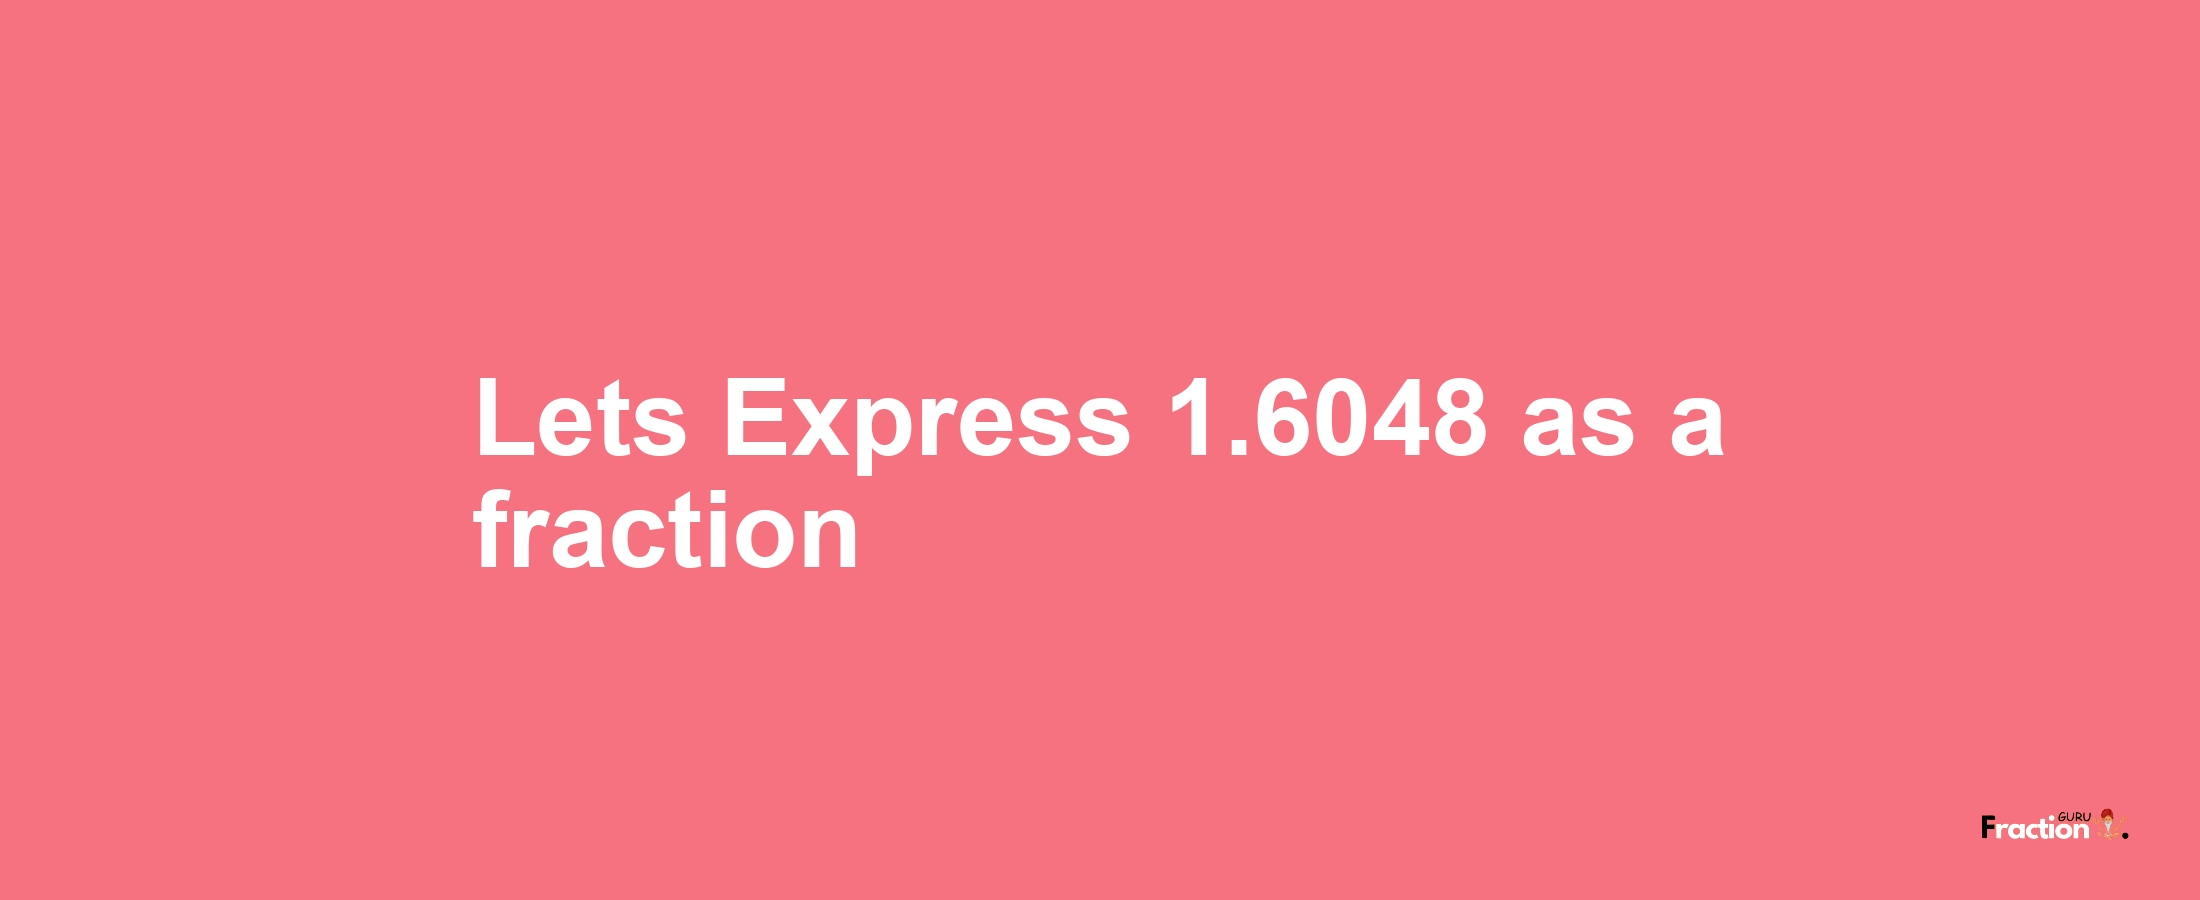 Lets Express 1.6048 as afraction